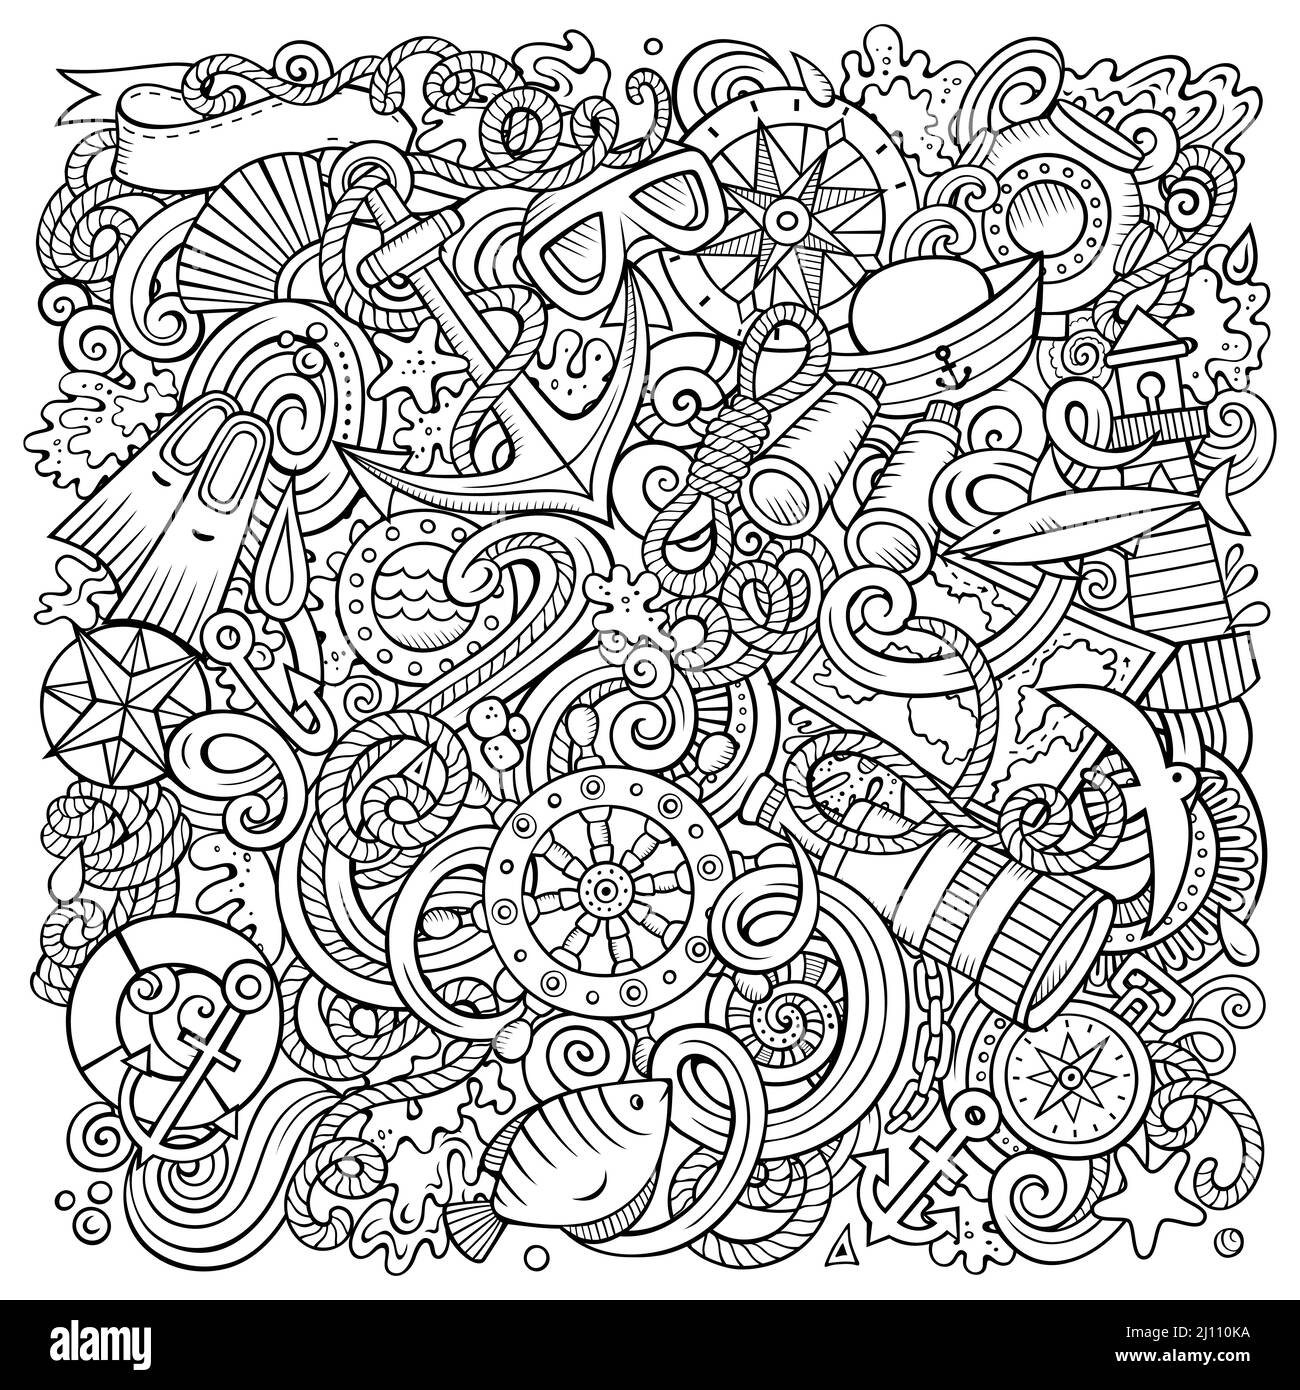 Nautical hand drawn vector doodles funny illustration. Stock Vector